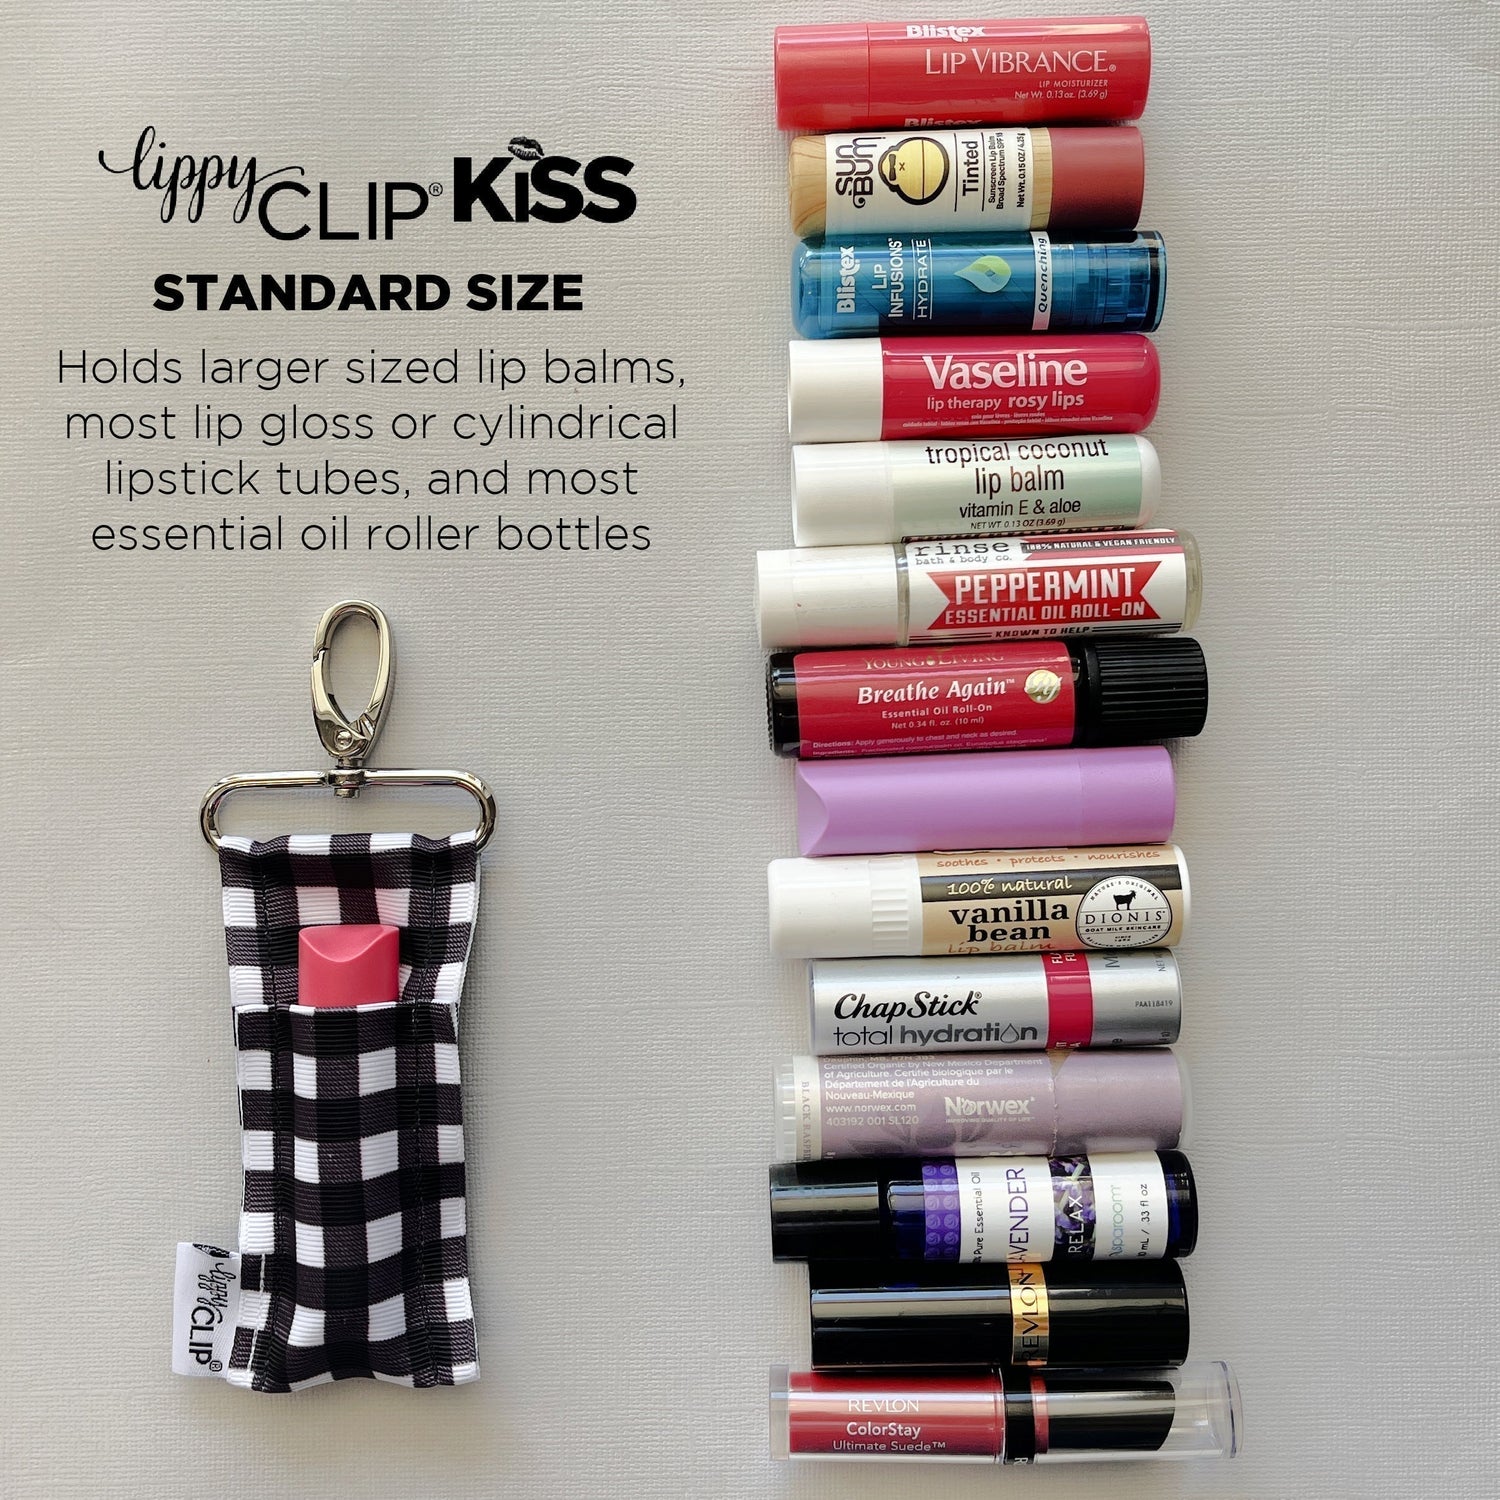 Black and White Check LippyClipKISS for larger lip balms, essential oil rollers, and more